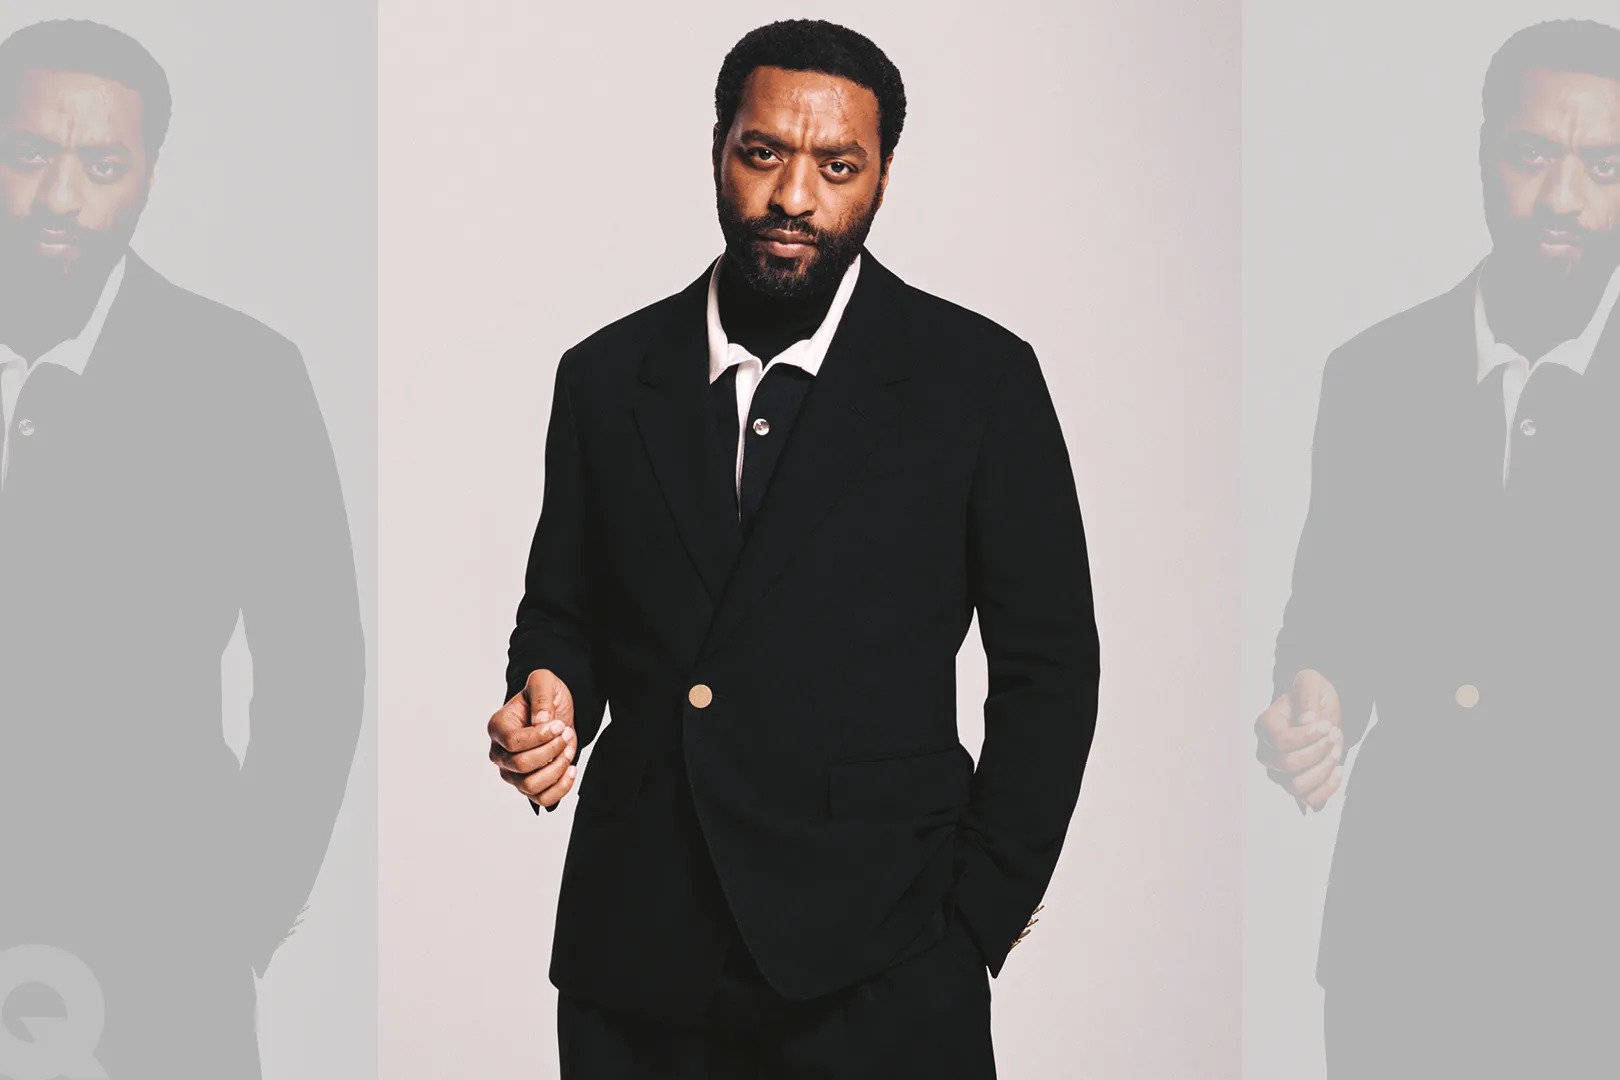 30 Facts About Chiwetel Ejiofor - Facts.net